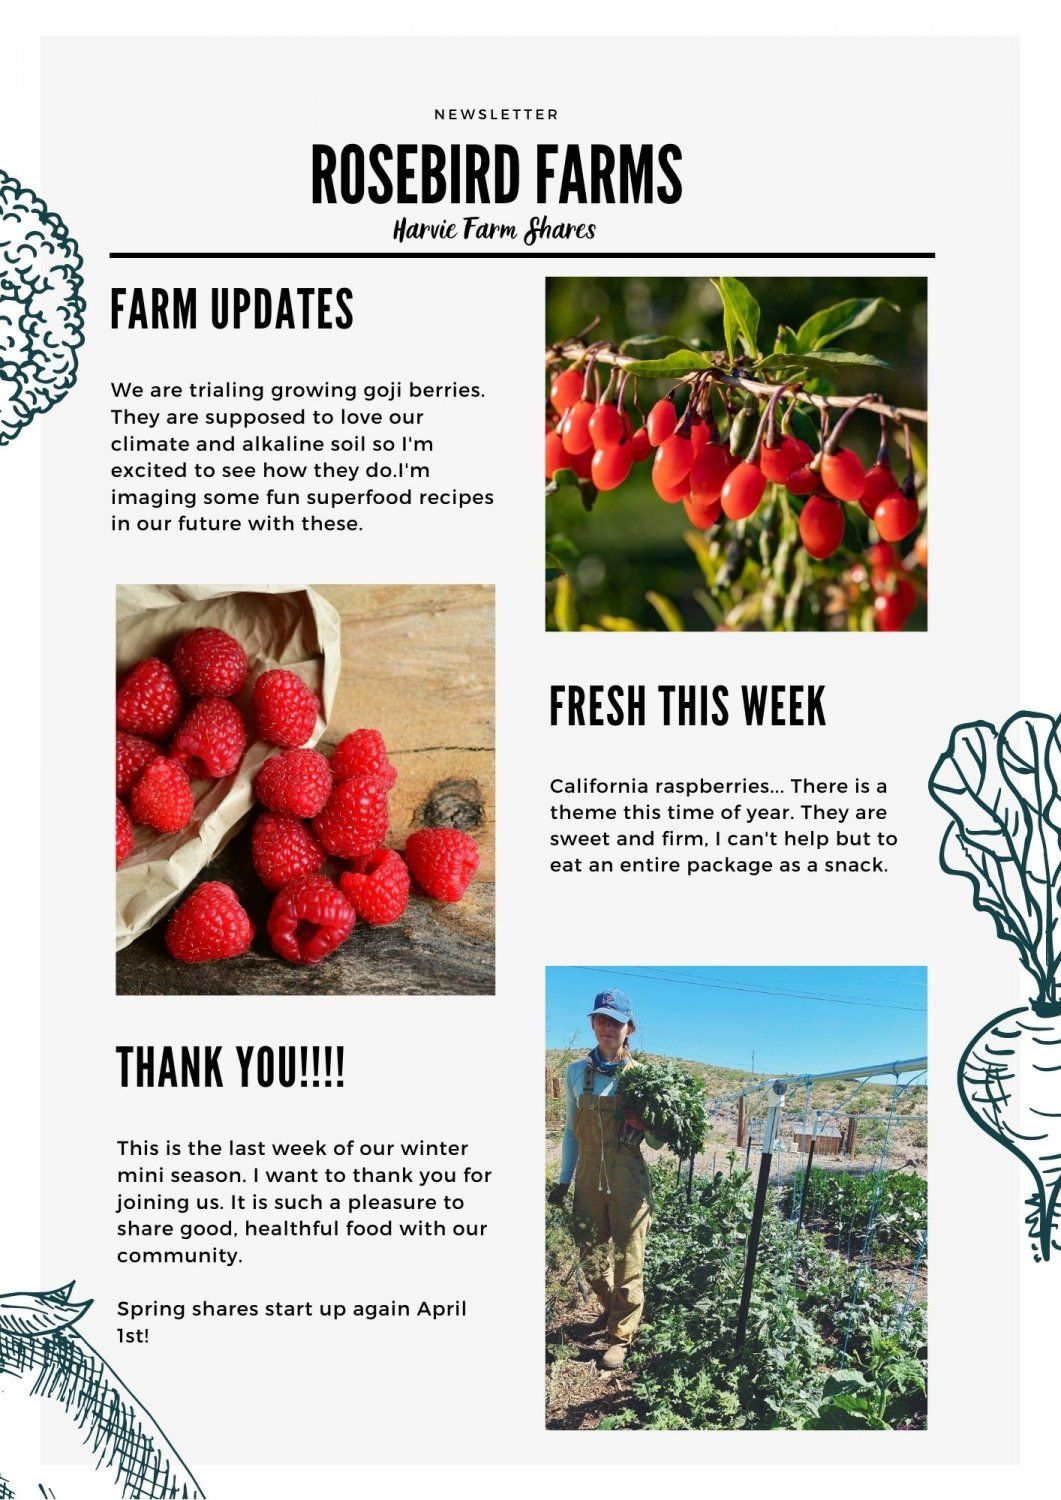 Farm Happenings for March 11, 2021